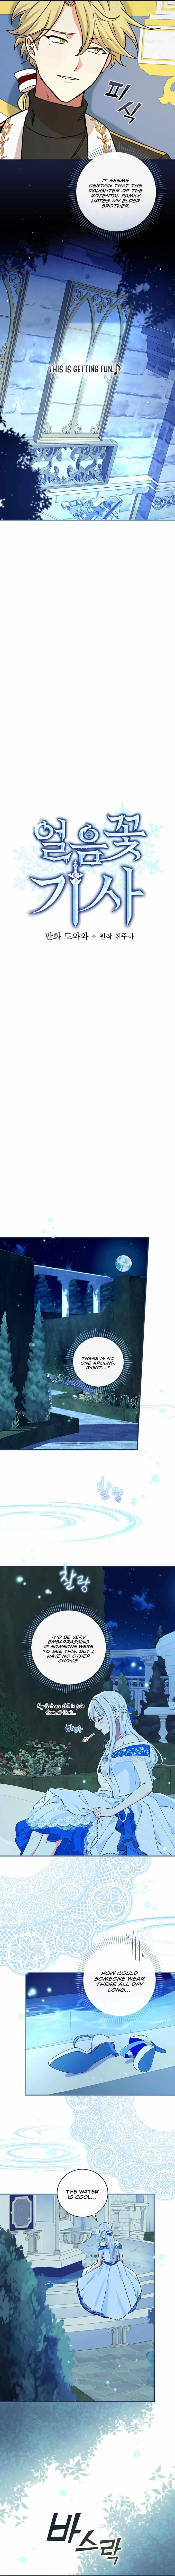 Knight of the Frozen Flower Chapter 17 page 3